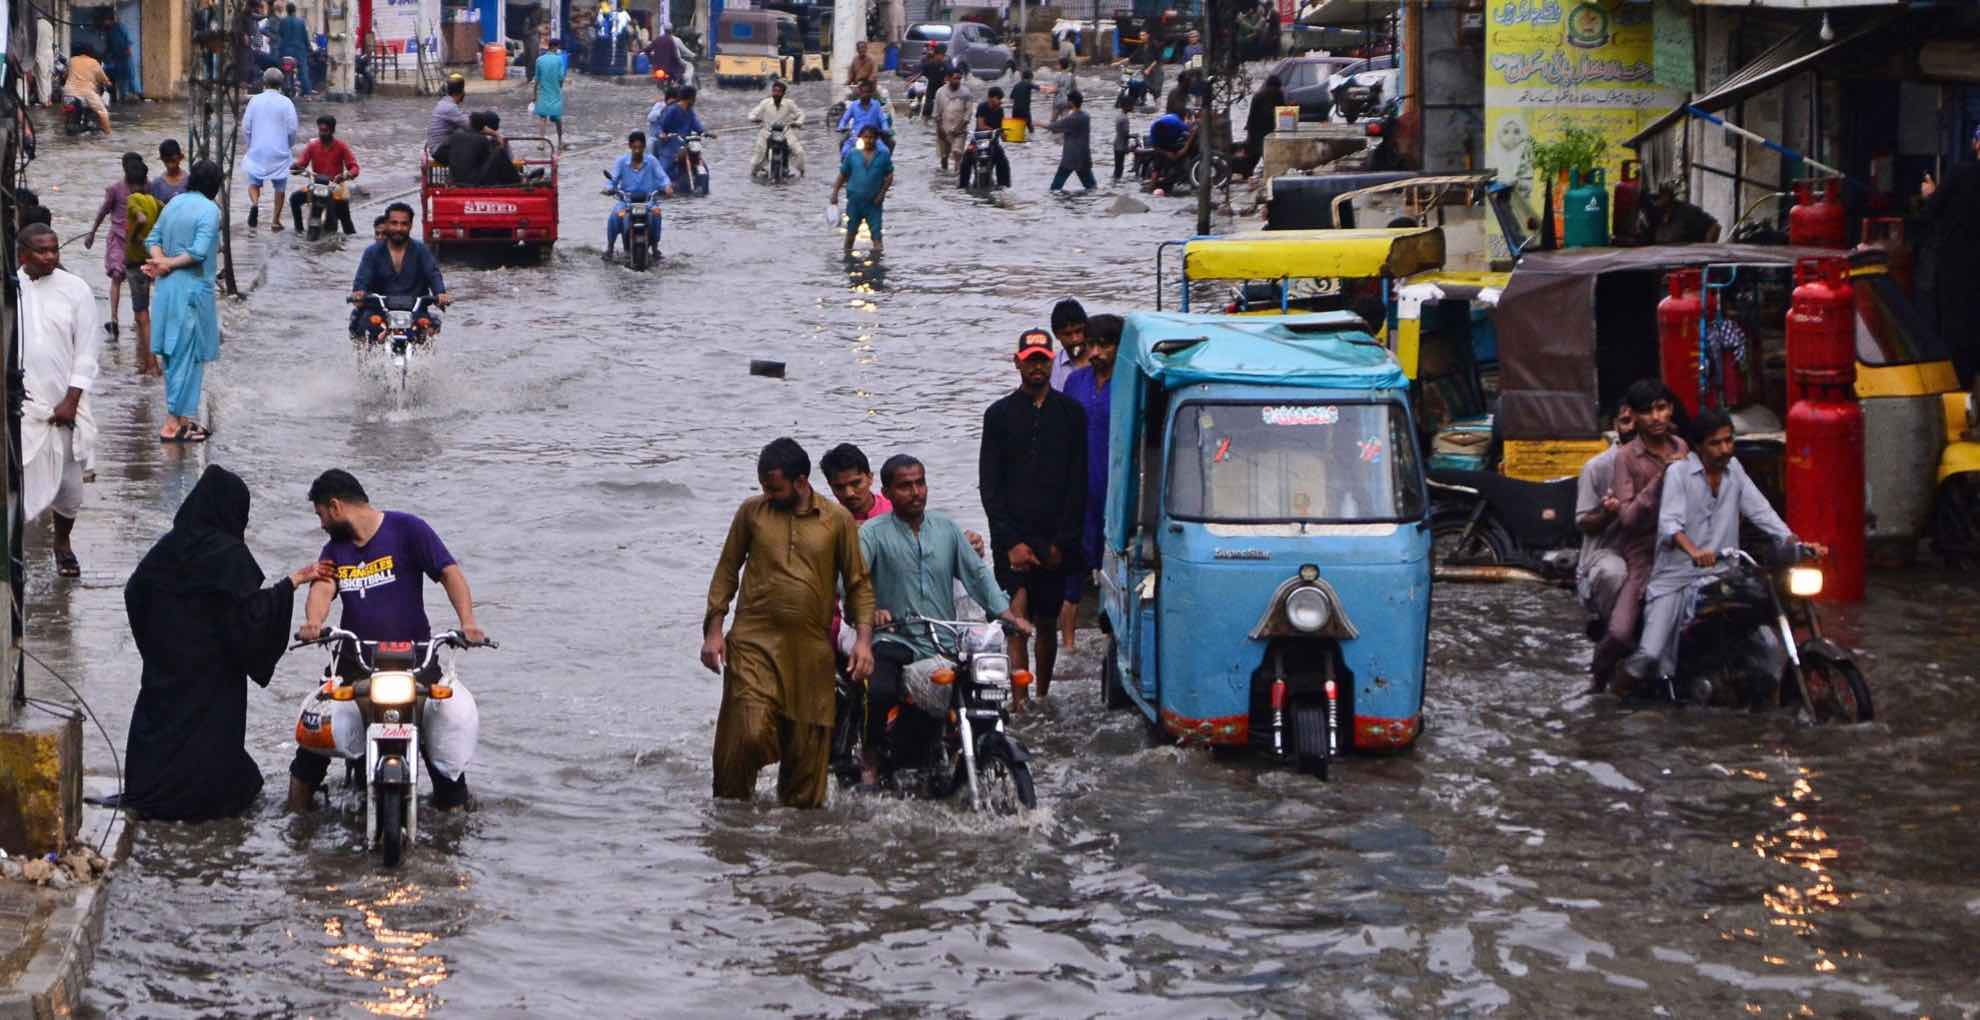 Commuters make their way through a flooded street during monsoon rainfall in Hyderabad on July 24, 2022.